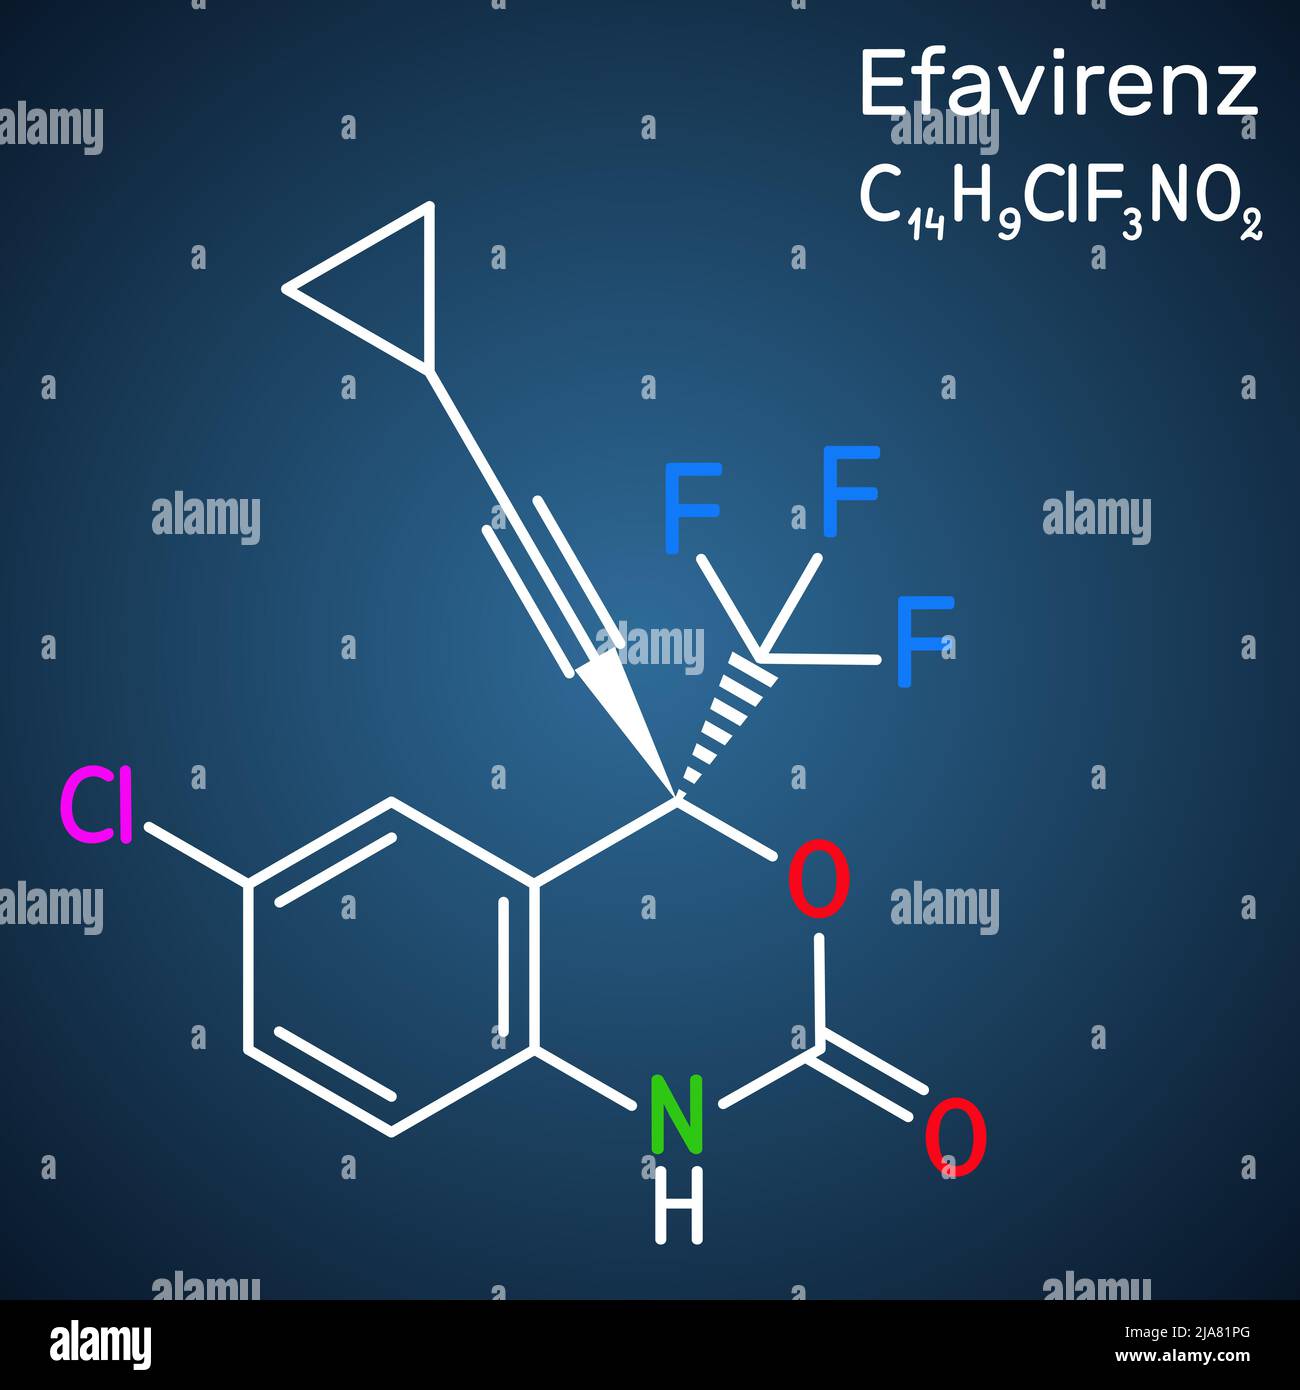 Efavirenz, EFV molecule. It is antiretroviral medication used to treat HIV and AIDS. Structural chemical formula on the dark blue background. Vector i Stock Vector